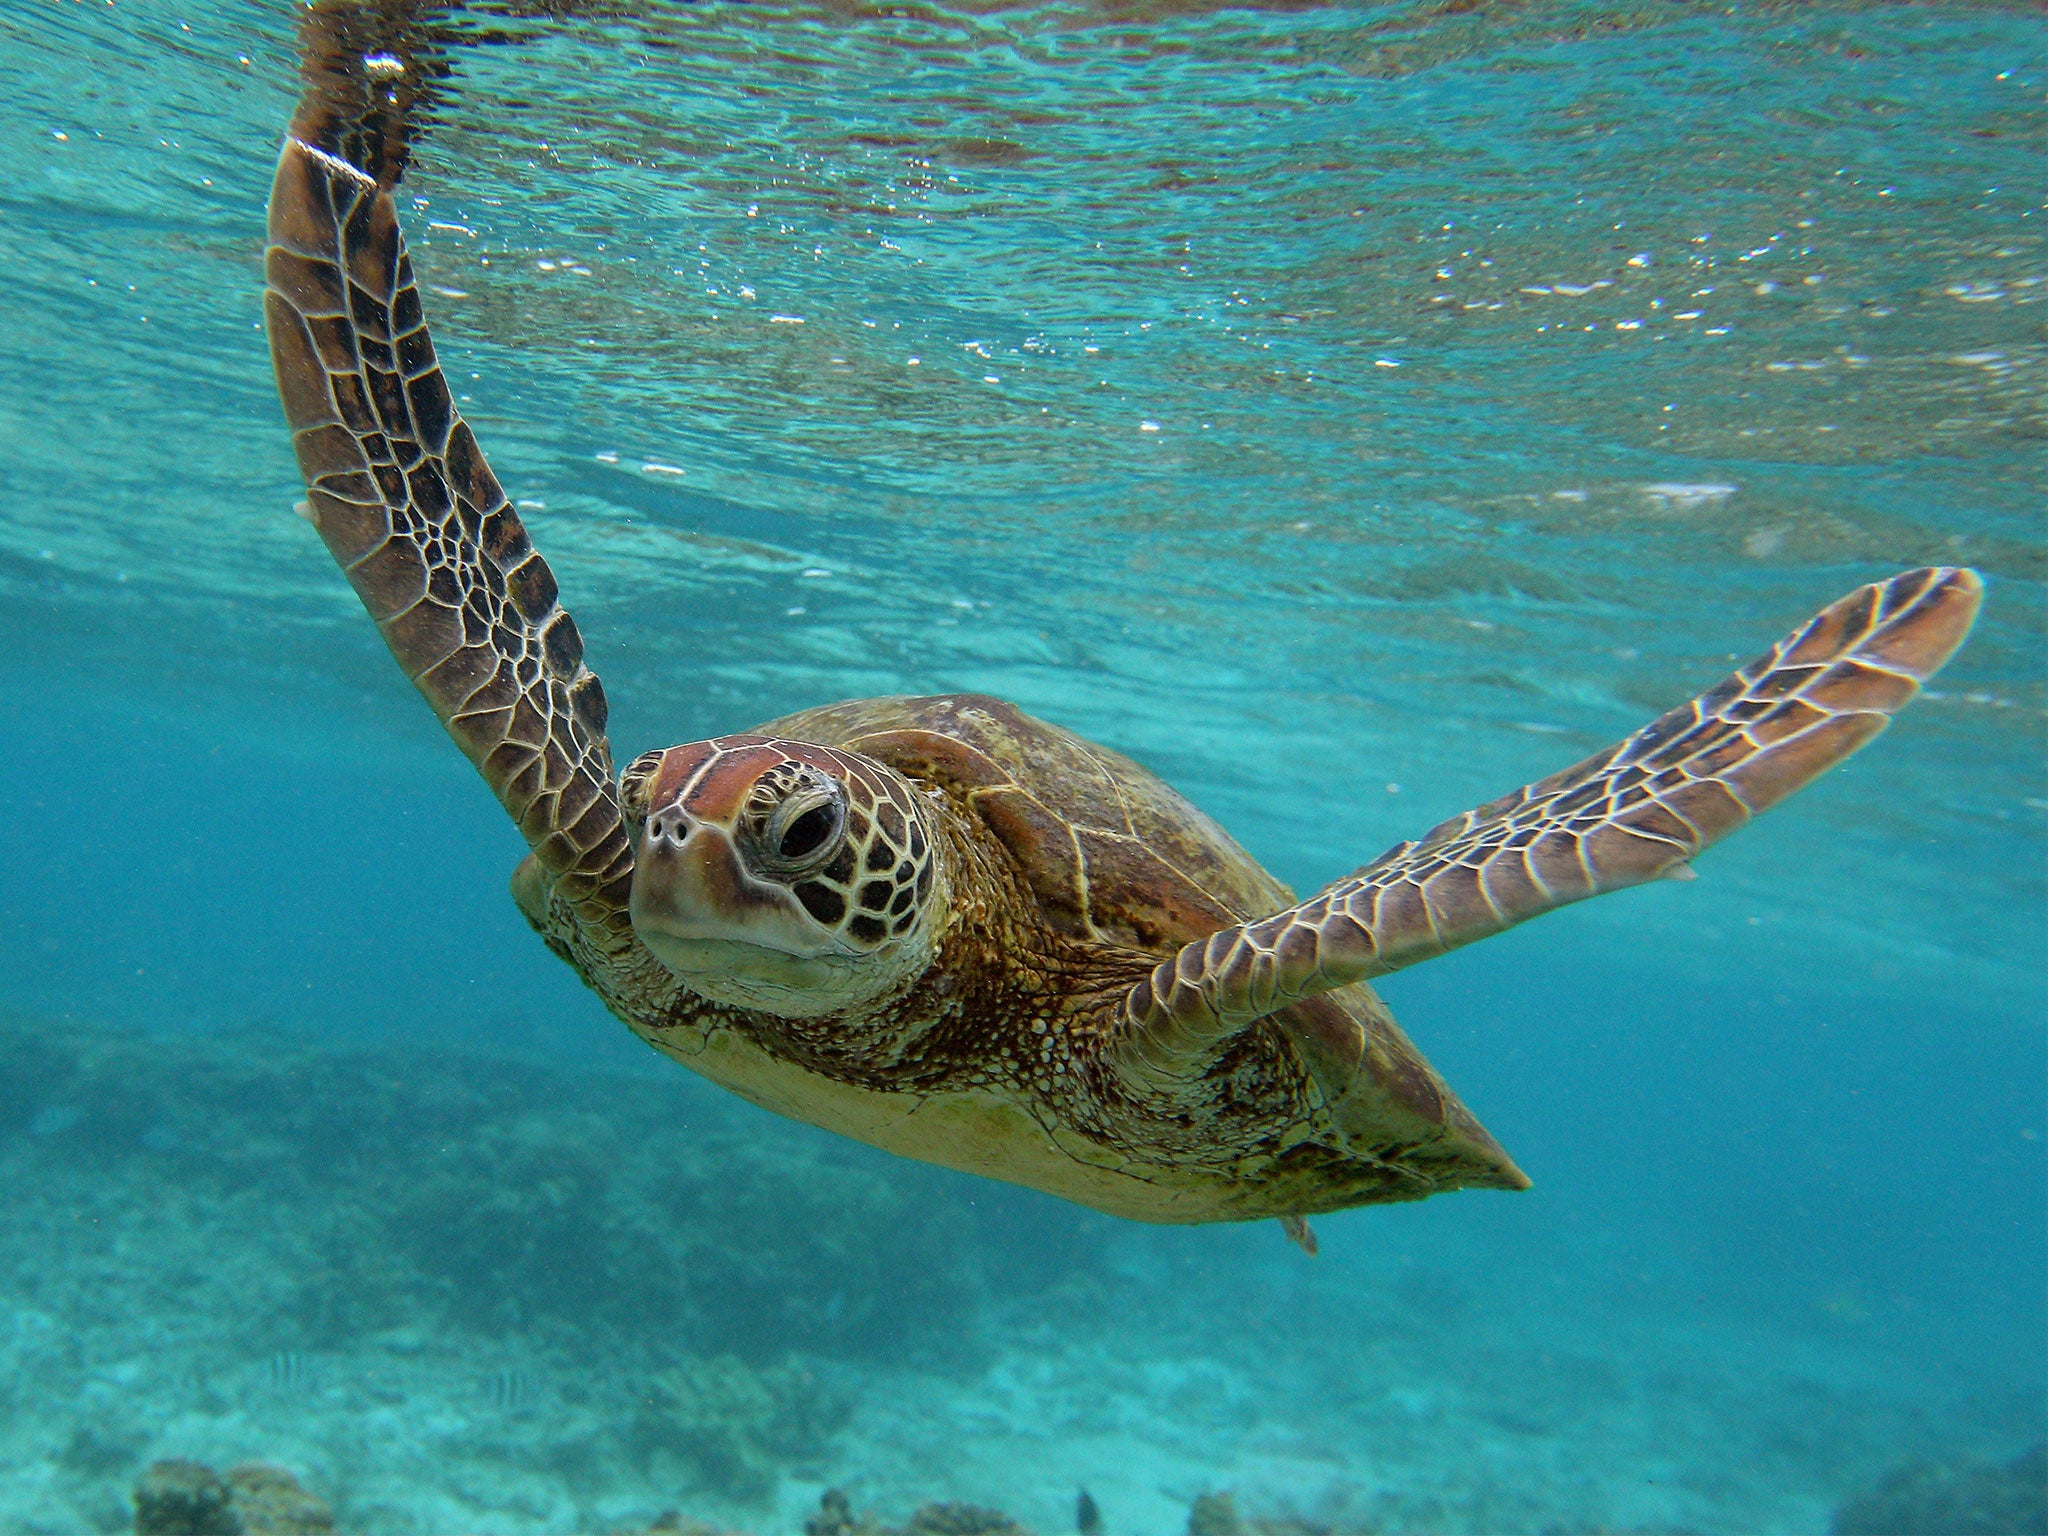 The endangered hawksbill turtle lives in the area covered by the study